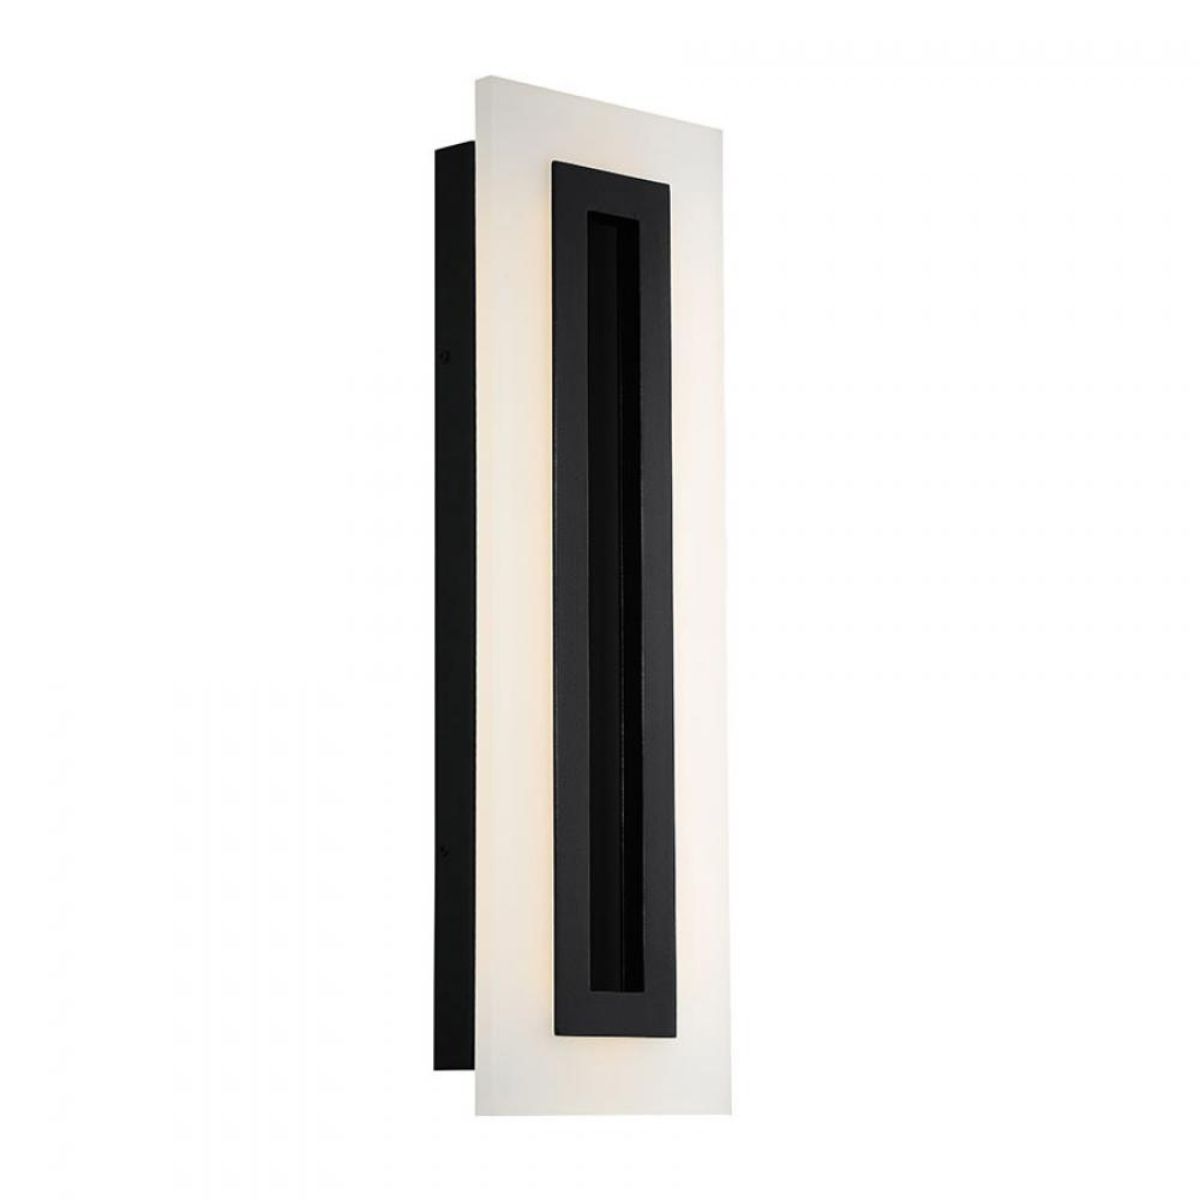 Shadow 24 In. LED Outdoor Wall Sconce 1111 lumens Black Finish